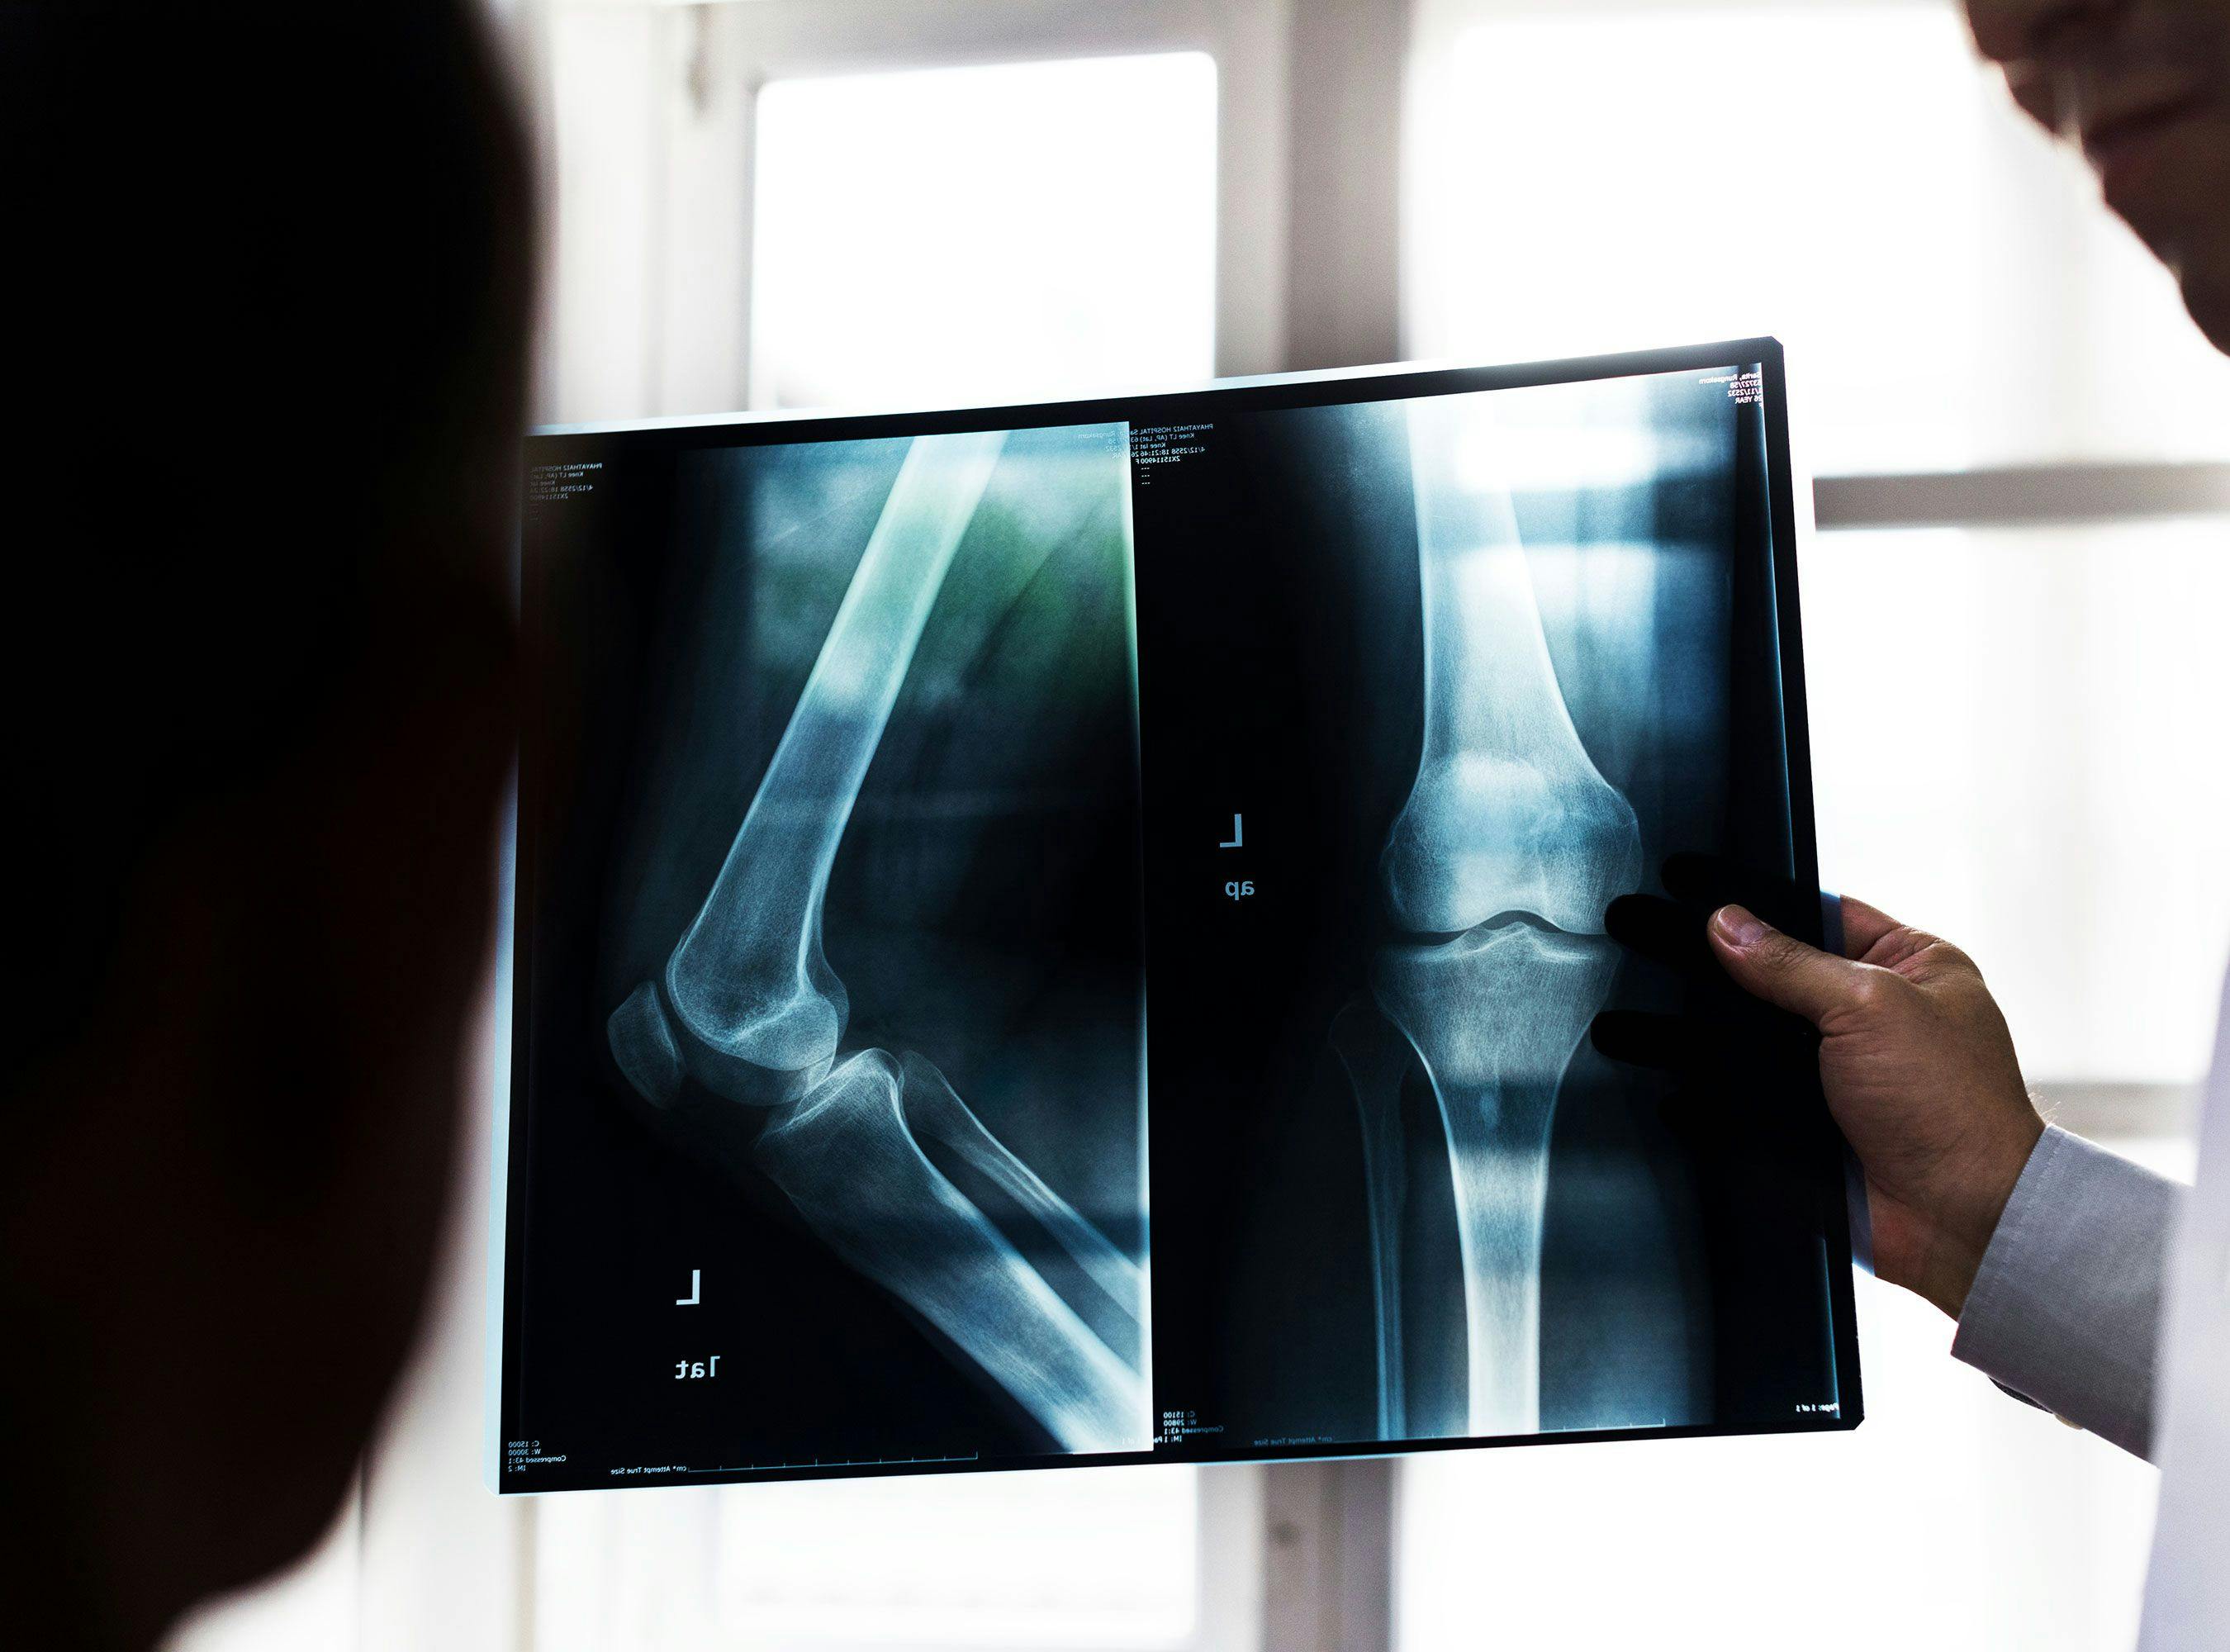 Orthopedic Surgery Expert’s Testimony Challenged as Biased, Unsupported Biomechanical Opinion